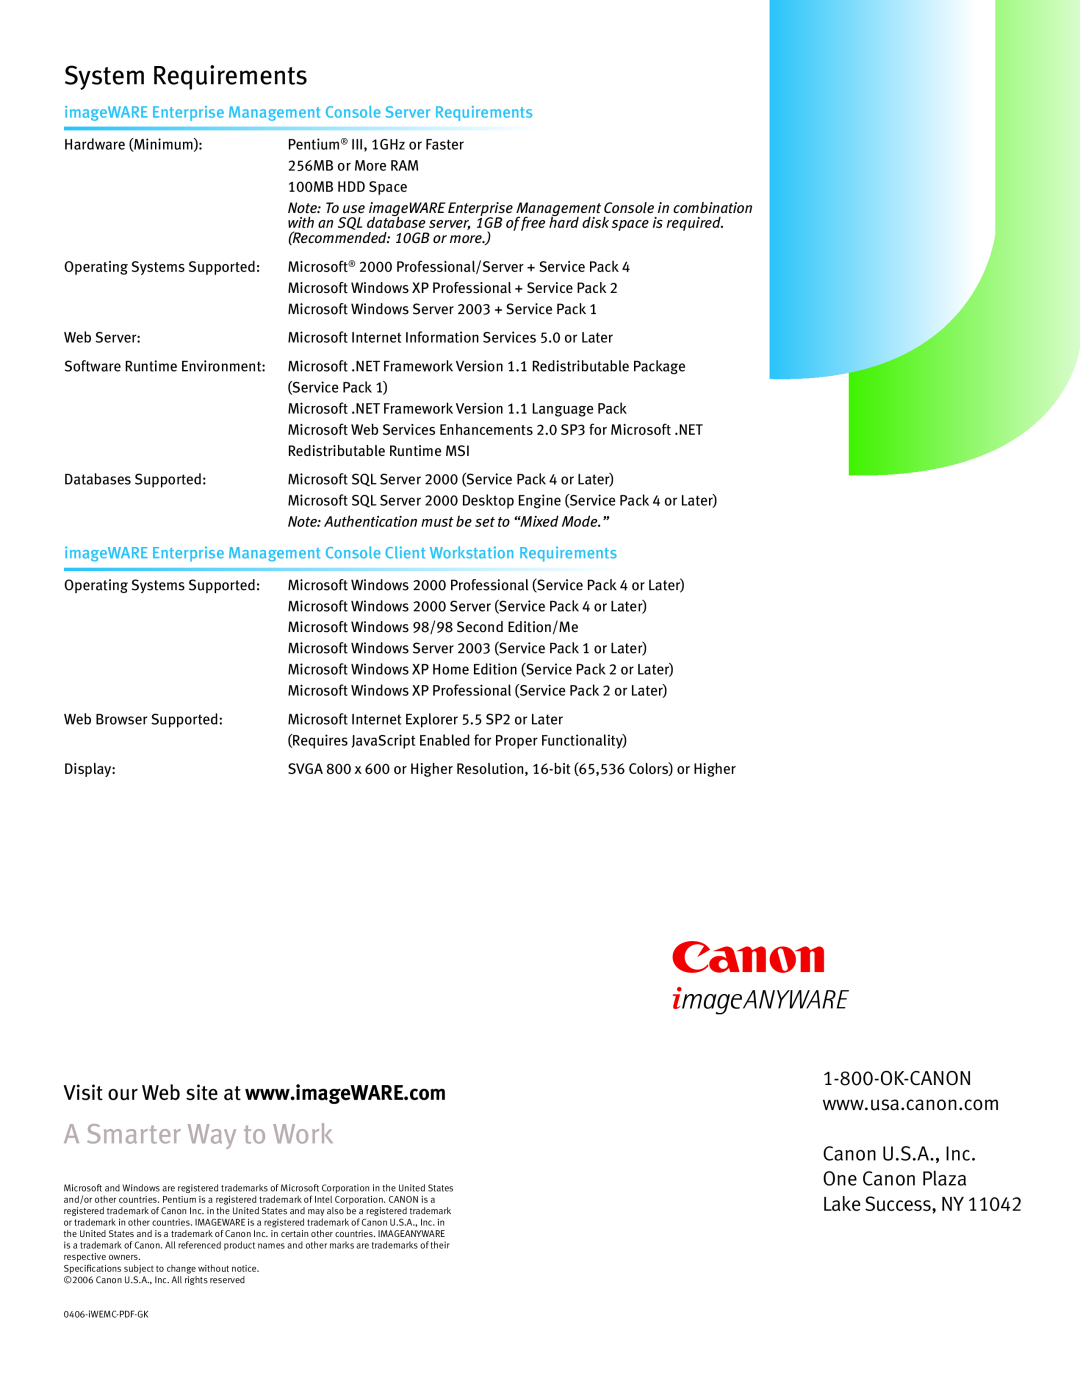 Canon ImageWare manual A Smarter Way to Work, System Requirements, Canon U.S.A., Inc One Canon Plaza Lake Success, NY 